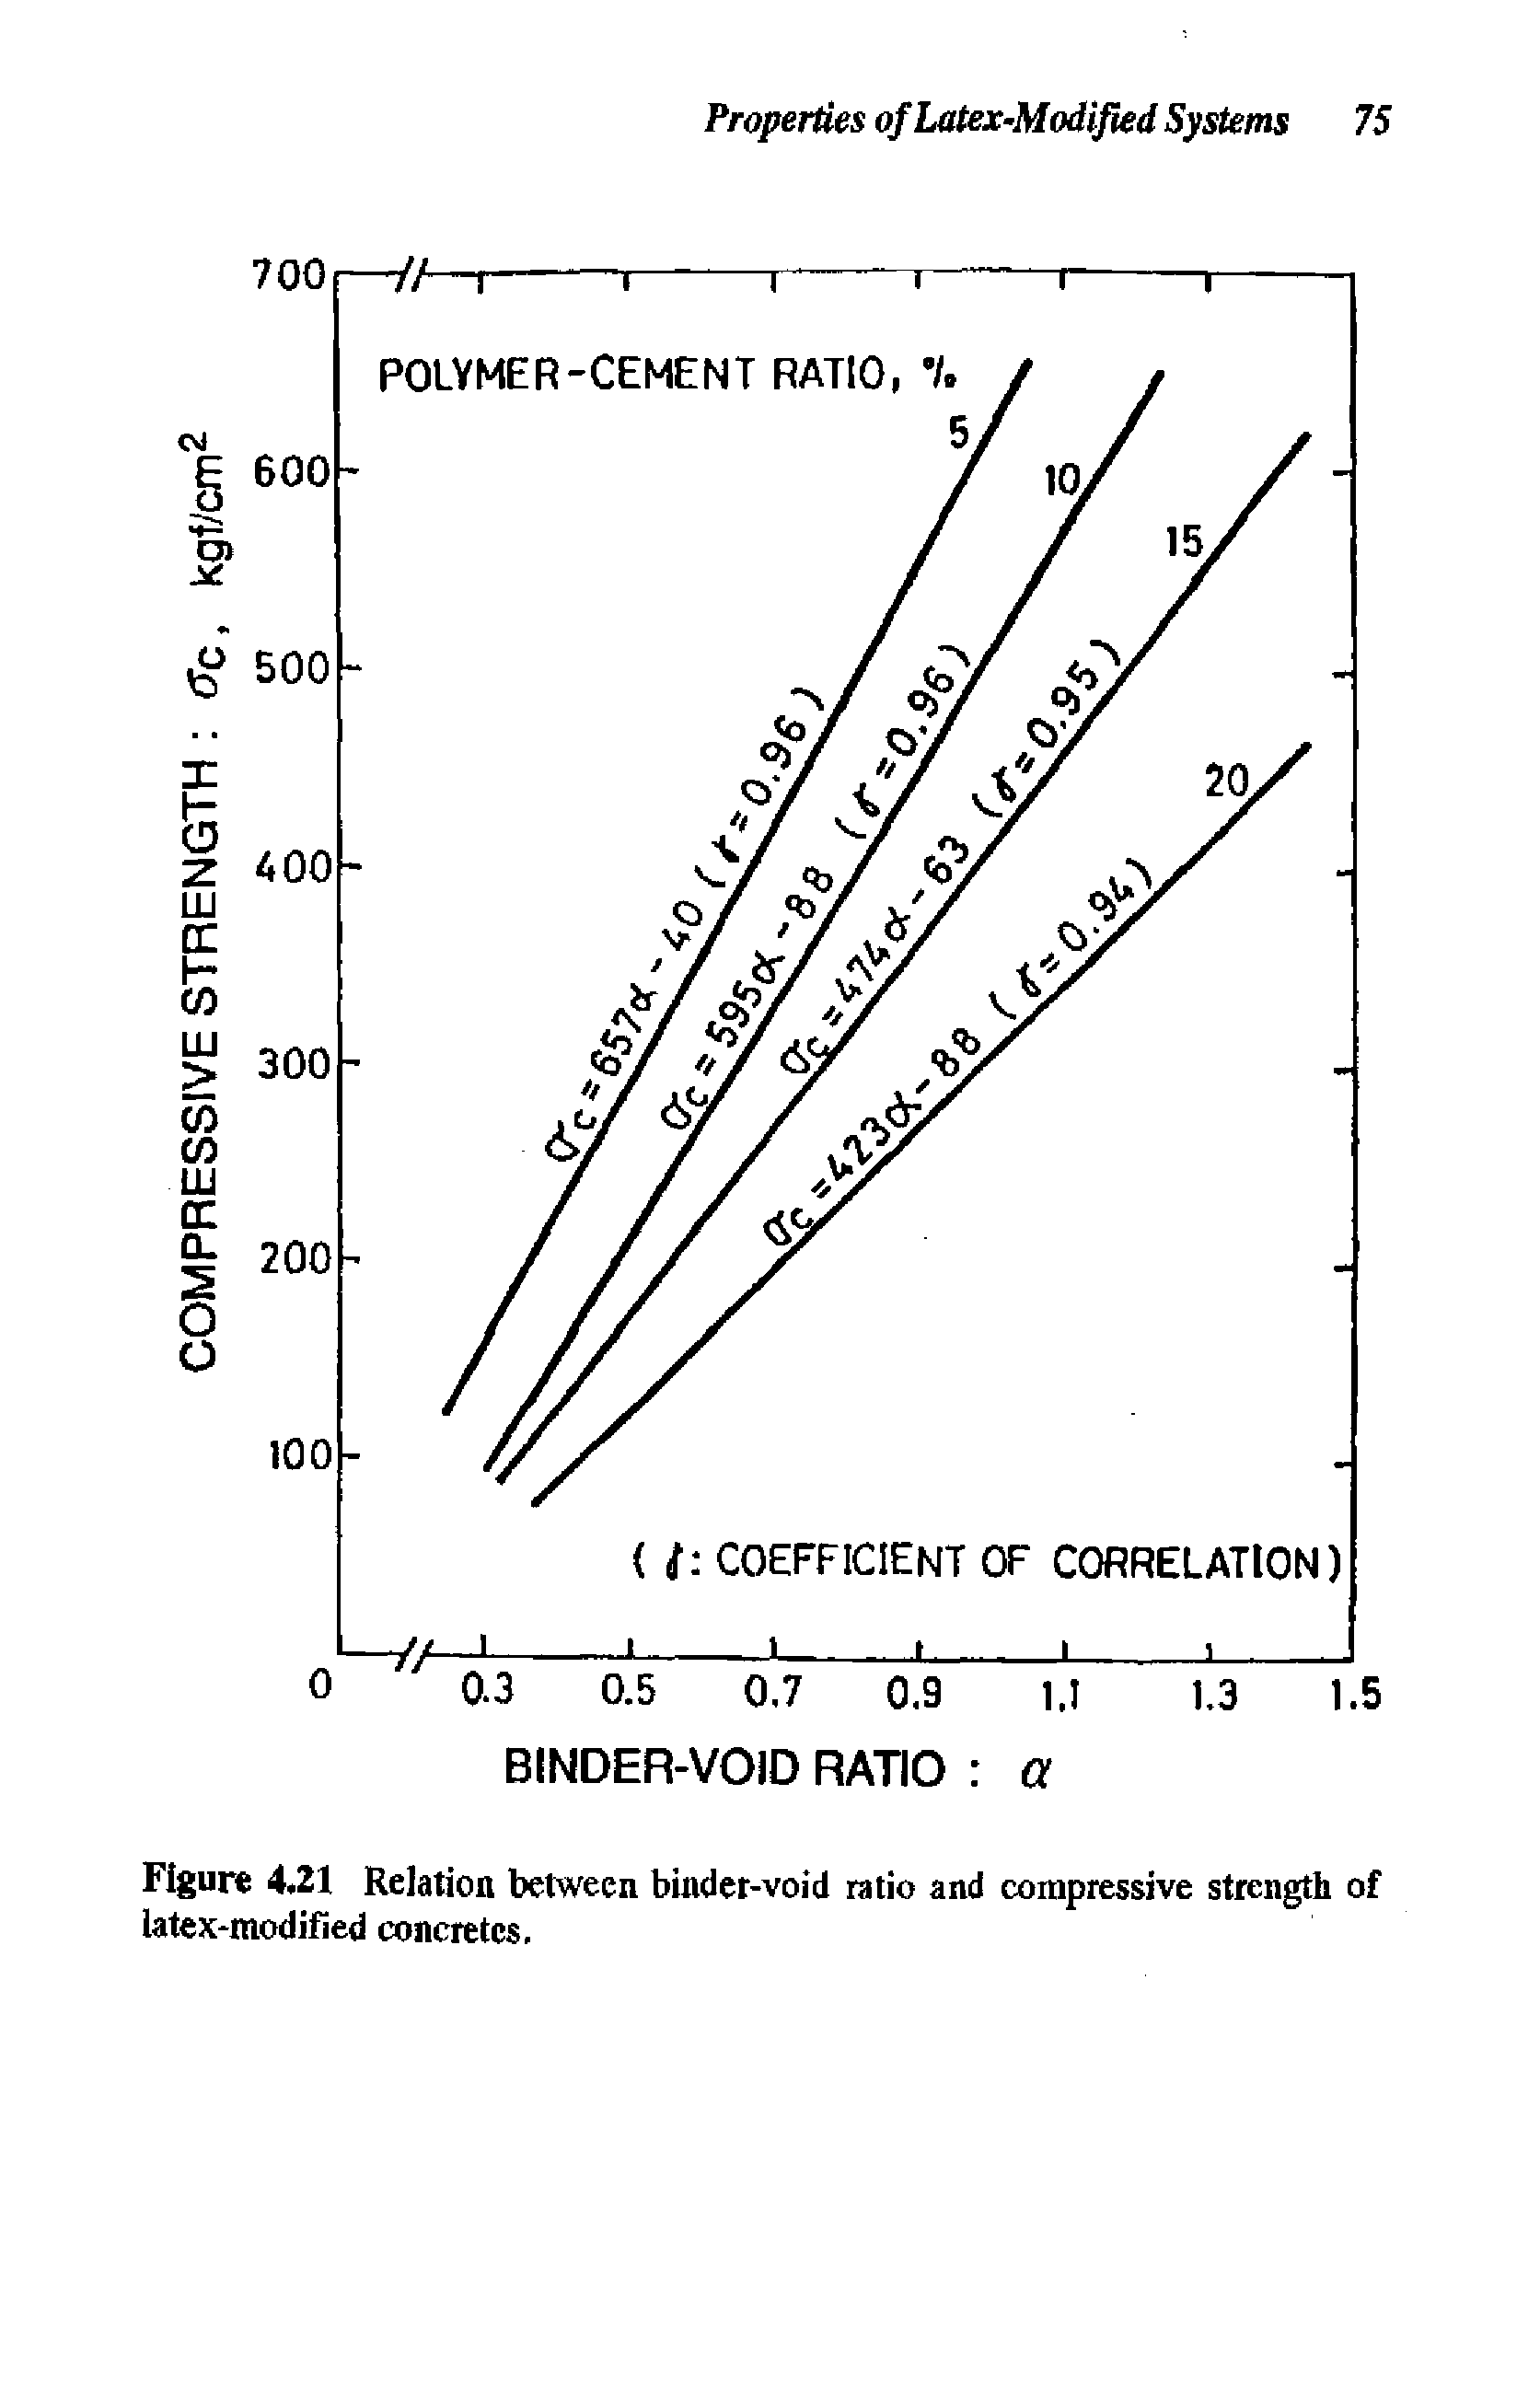 Figure 4.21 Relation between binder-void ratio and compressive strength of latex-modified concretes.